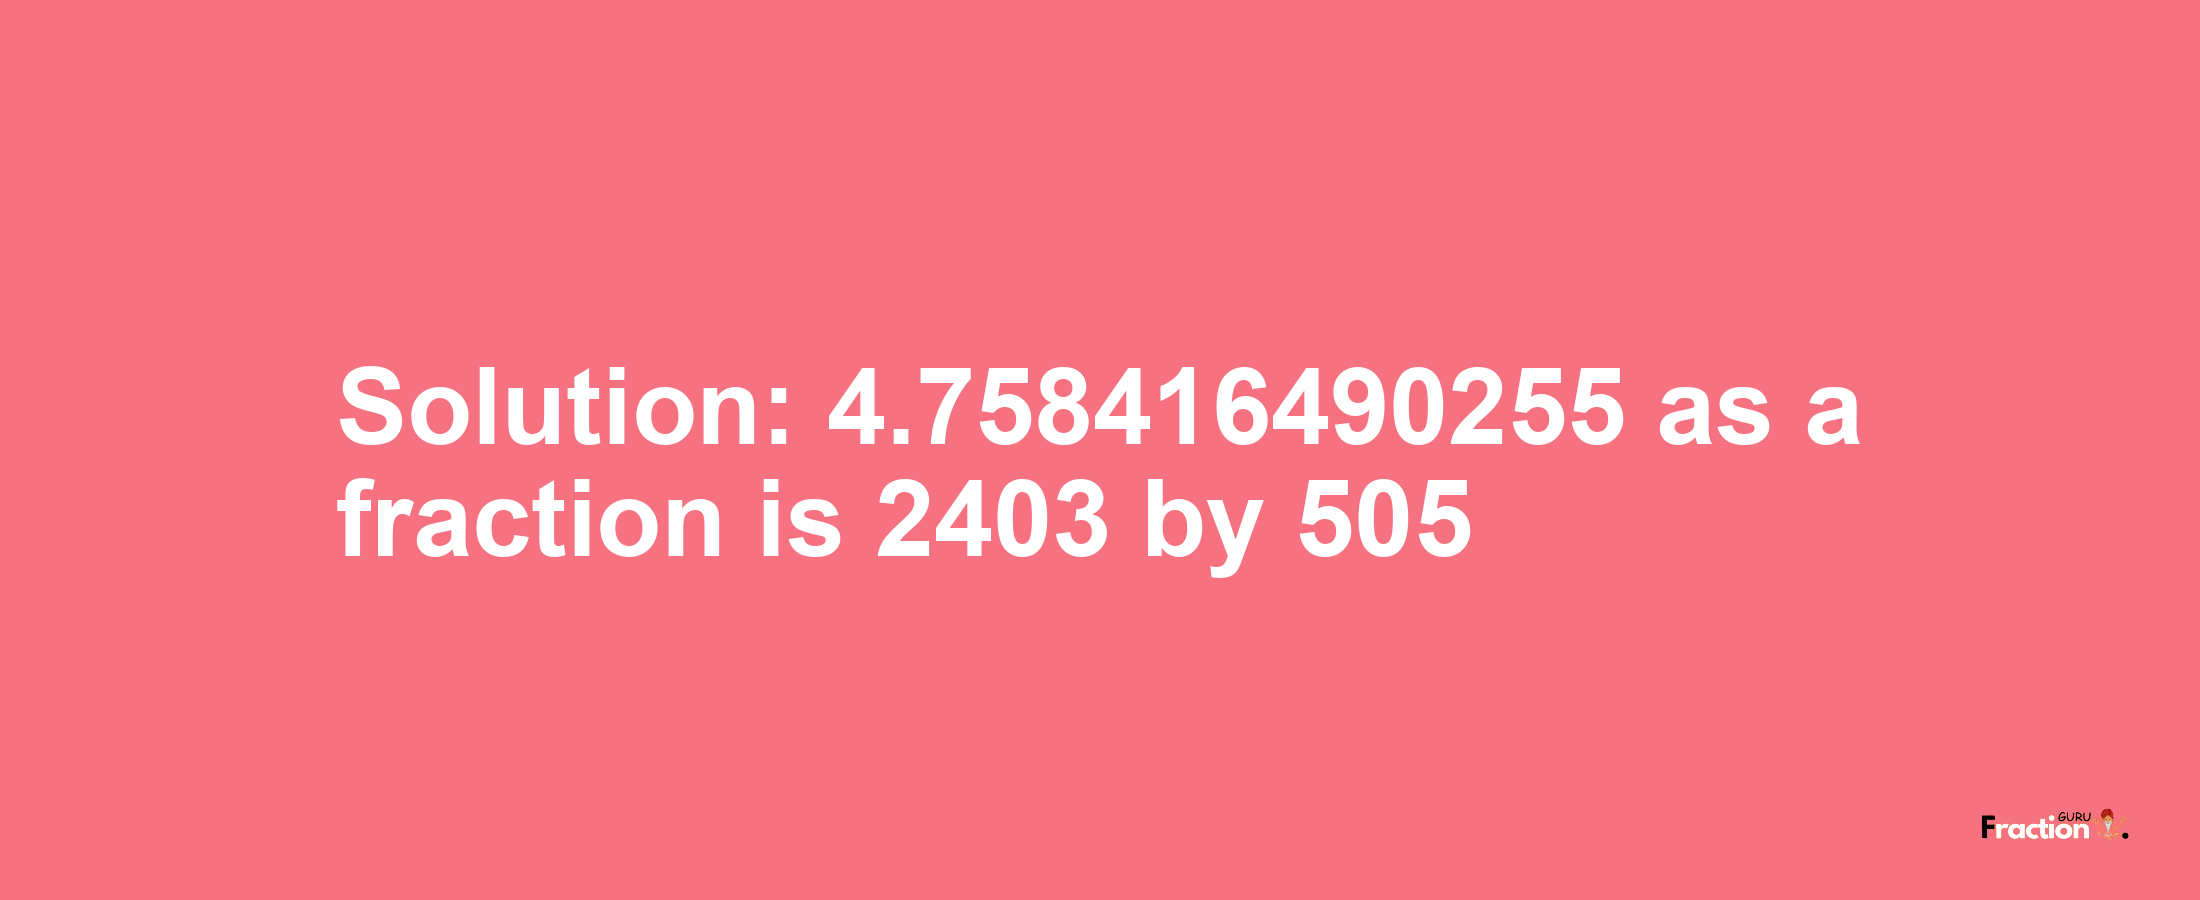 Solution:4.758416490255 as a fraction is 2403/505